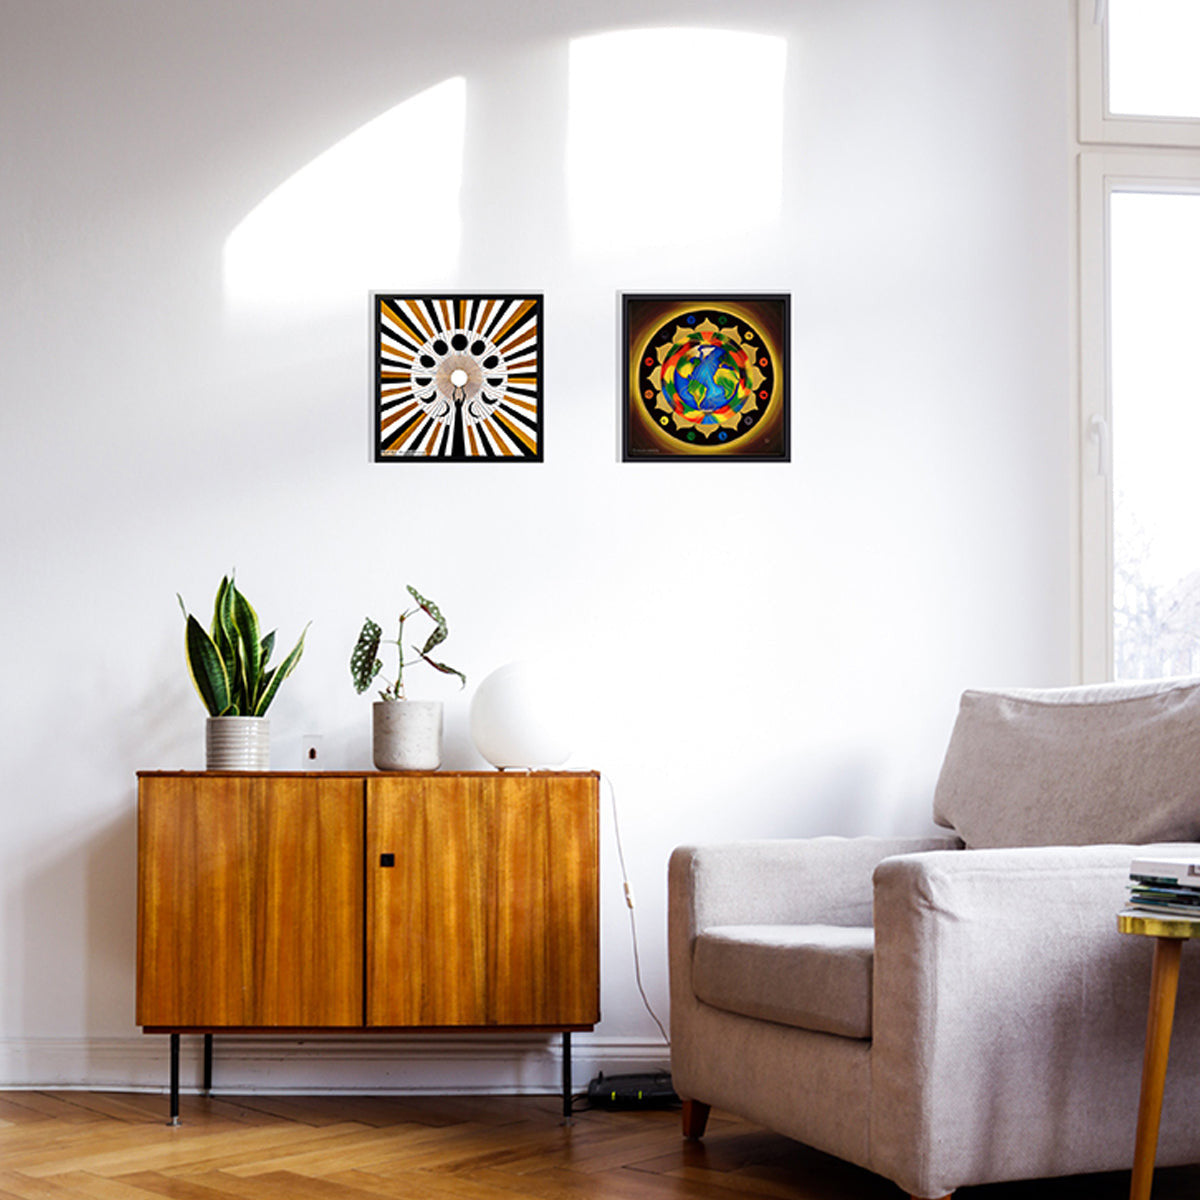 two prints on canvas with the planet earth like a chakra and a mandala about the moon cycles